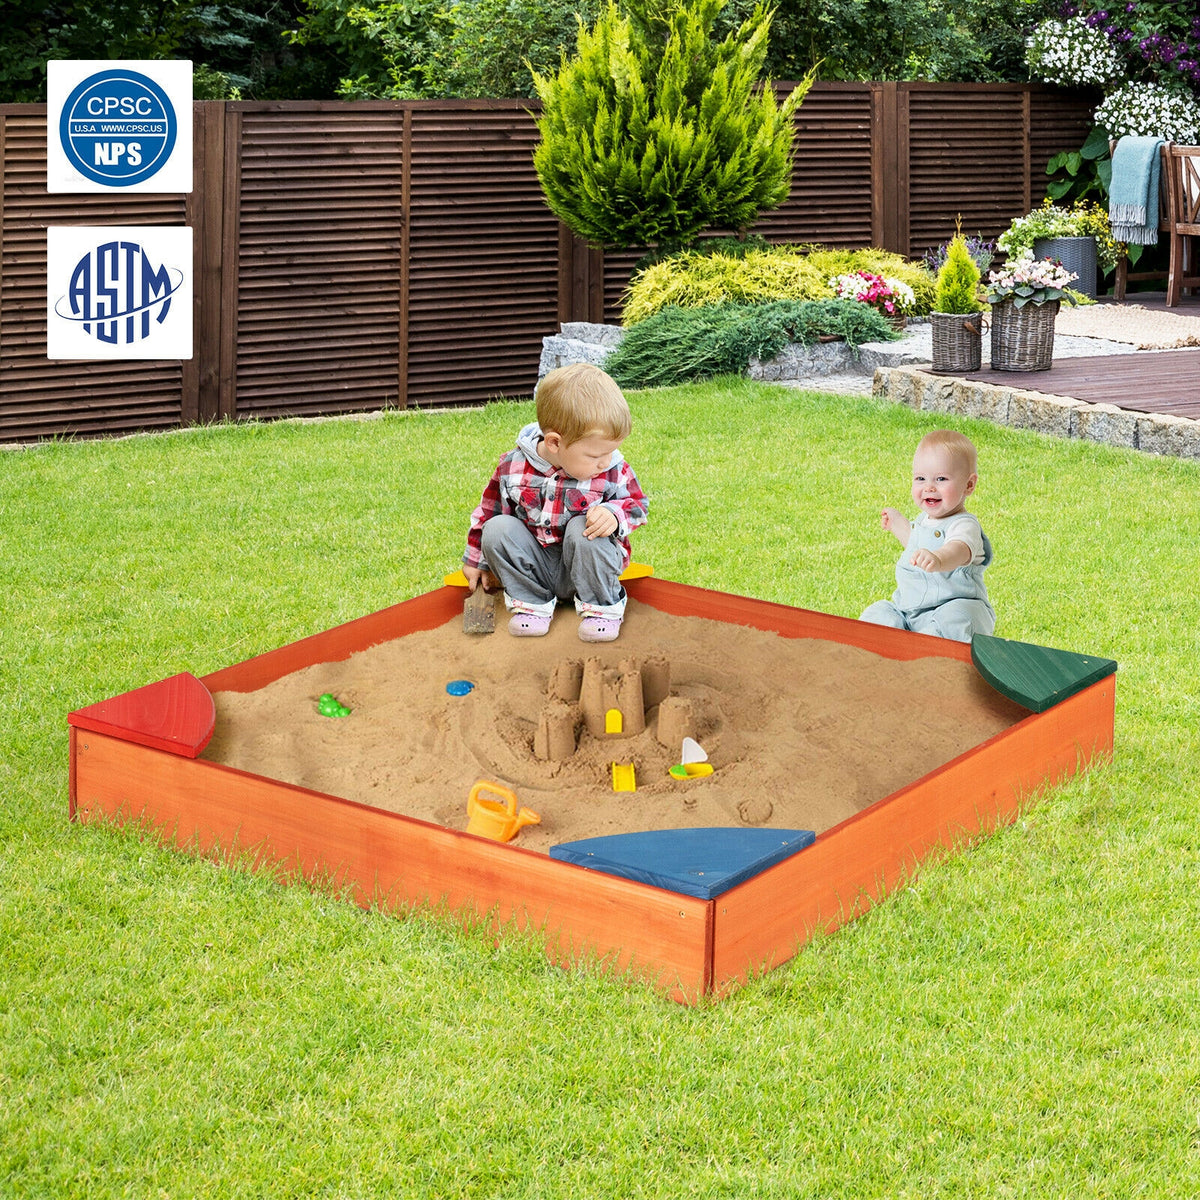 Hikidspace Outdoor Wooden Backyard Sandbox with Built-in Corner Seating for Kids